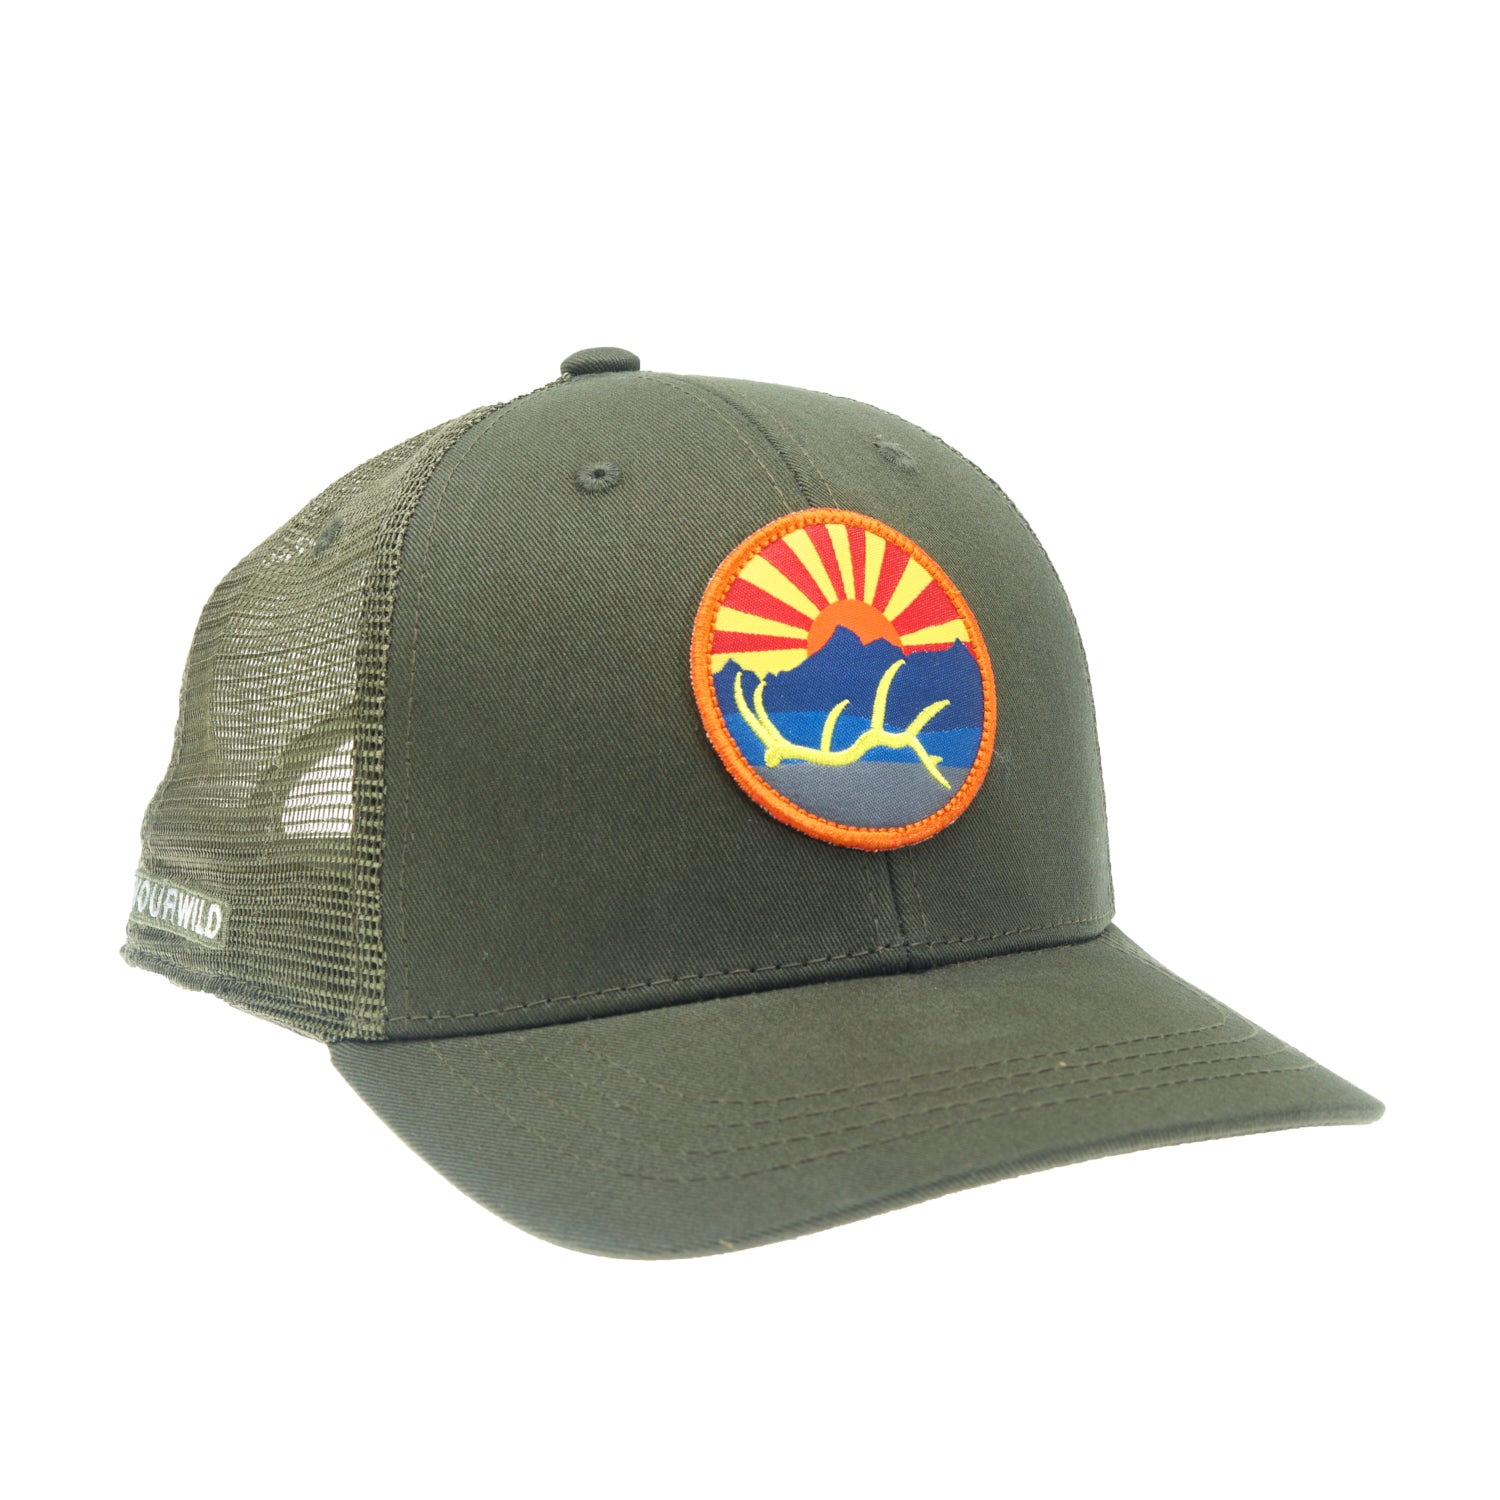 A hat with green mesh in the back with green fabric in the front has a circular patch on front with an elk antler, in front of a mountain and sunset